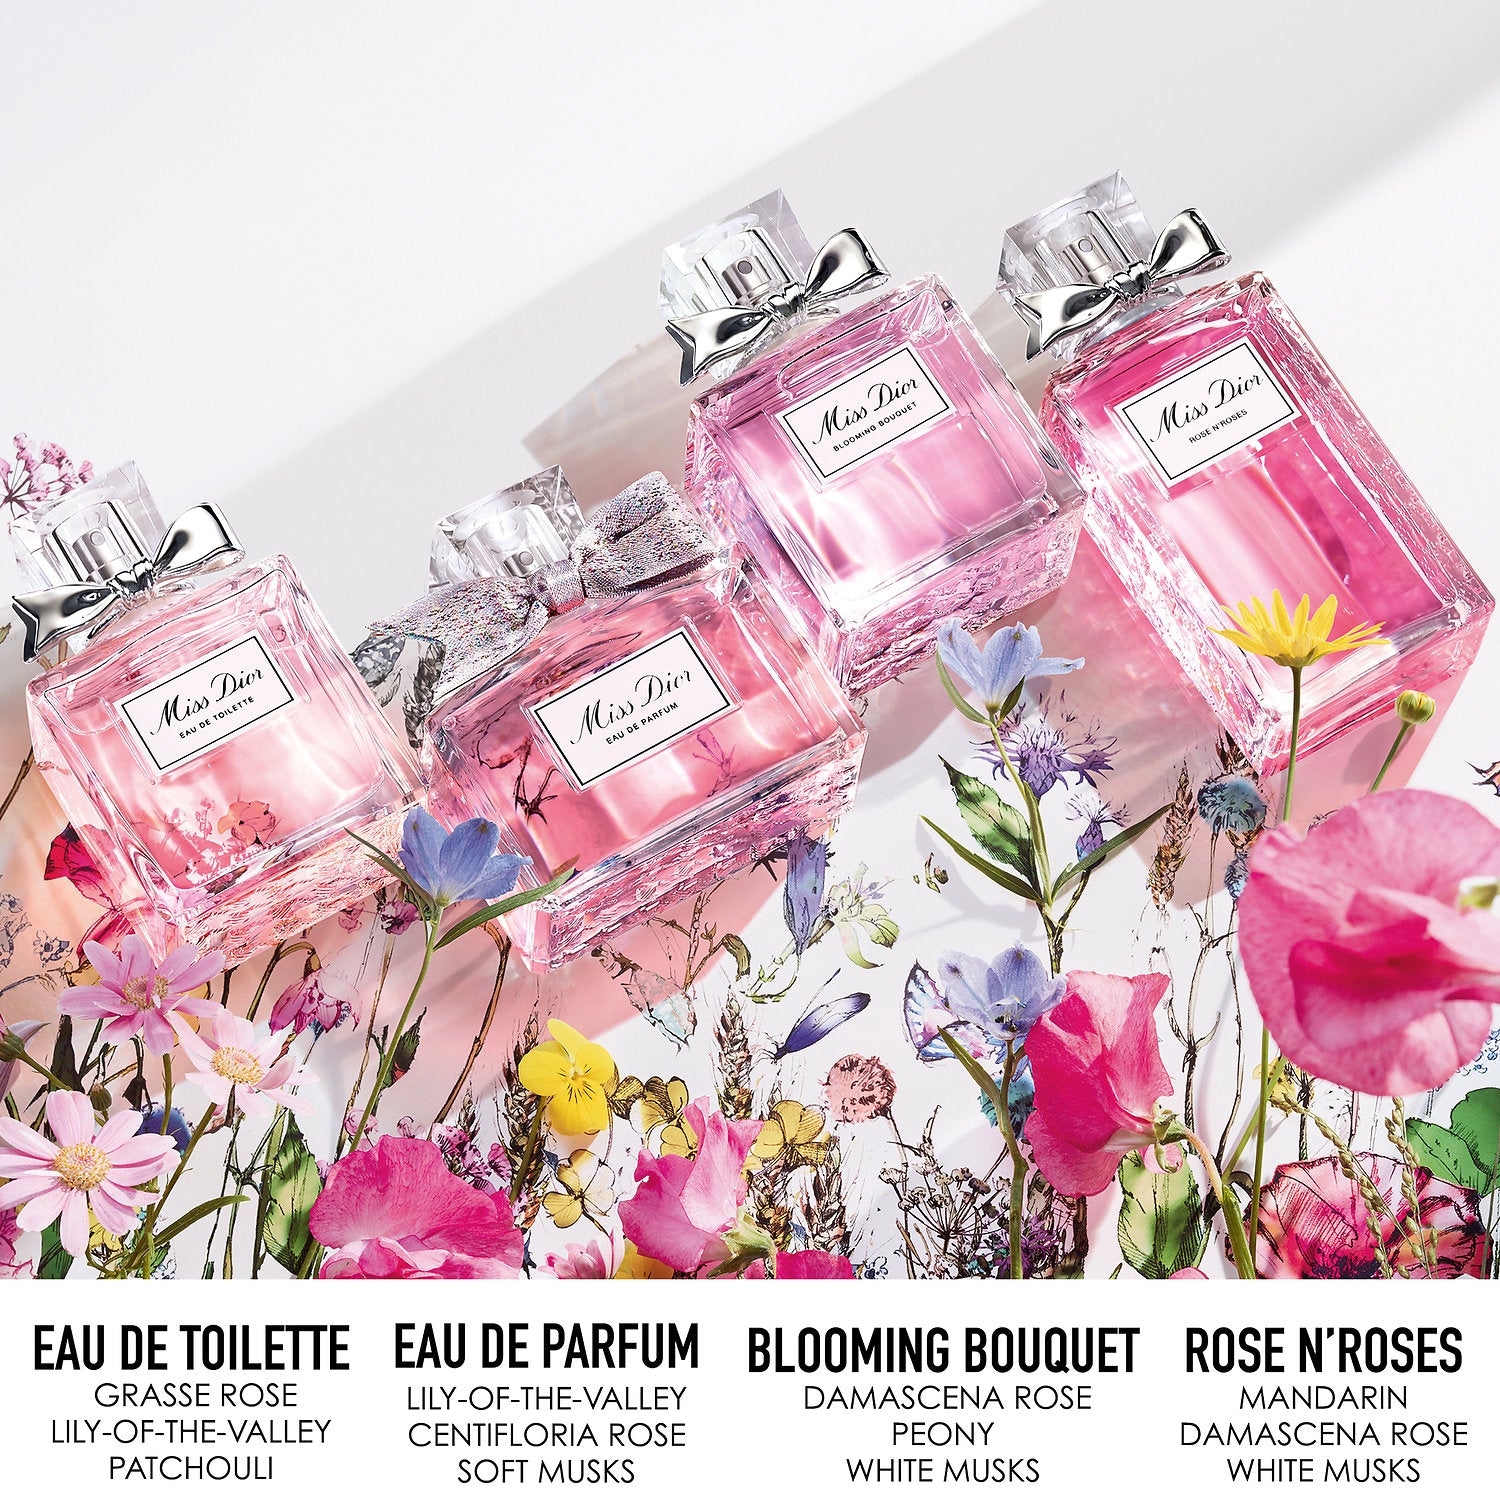 Miss Dior Blooming Bouquet Couture Edition Dior perfume - a